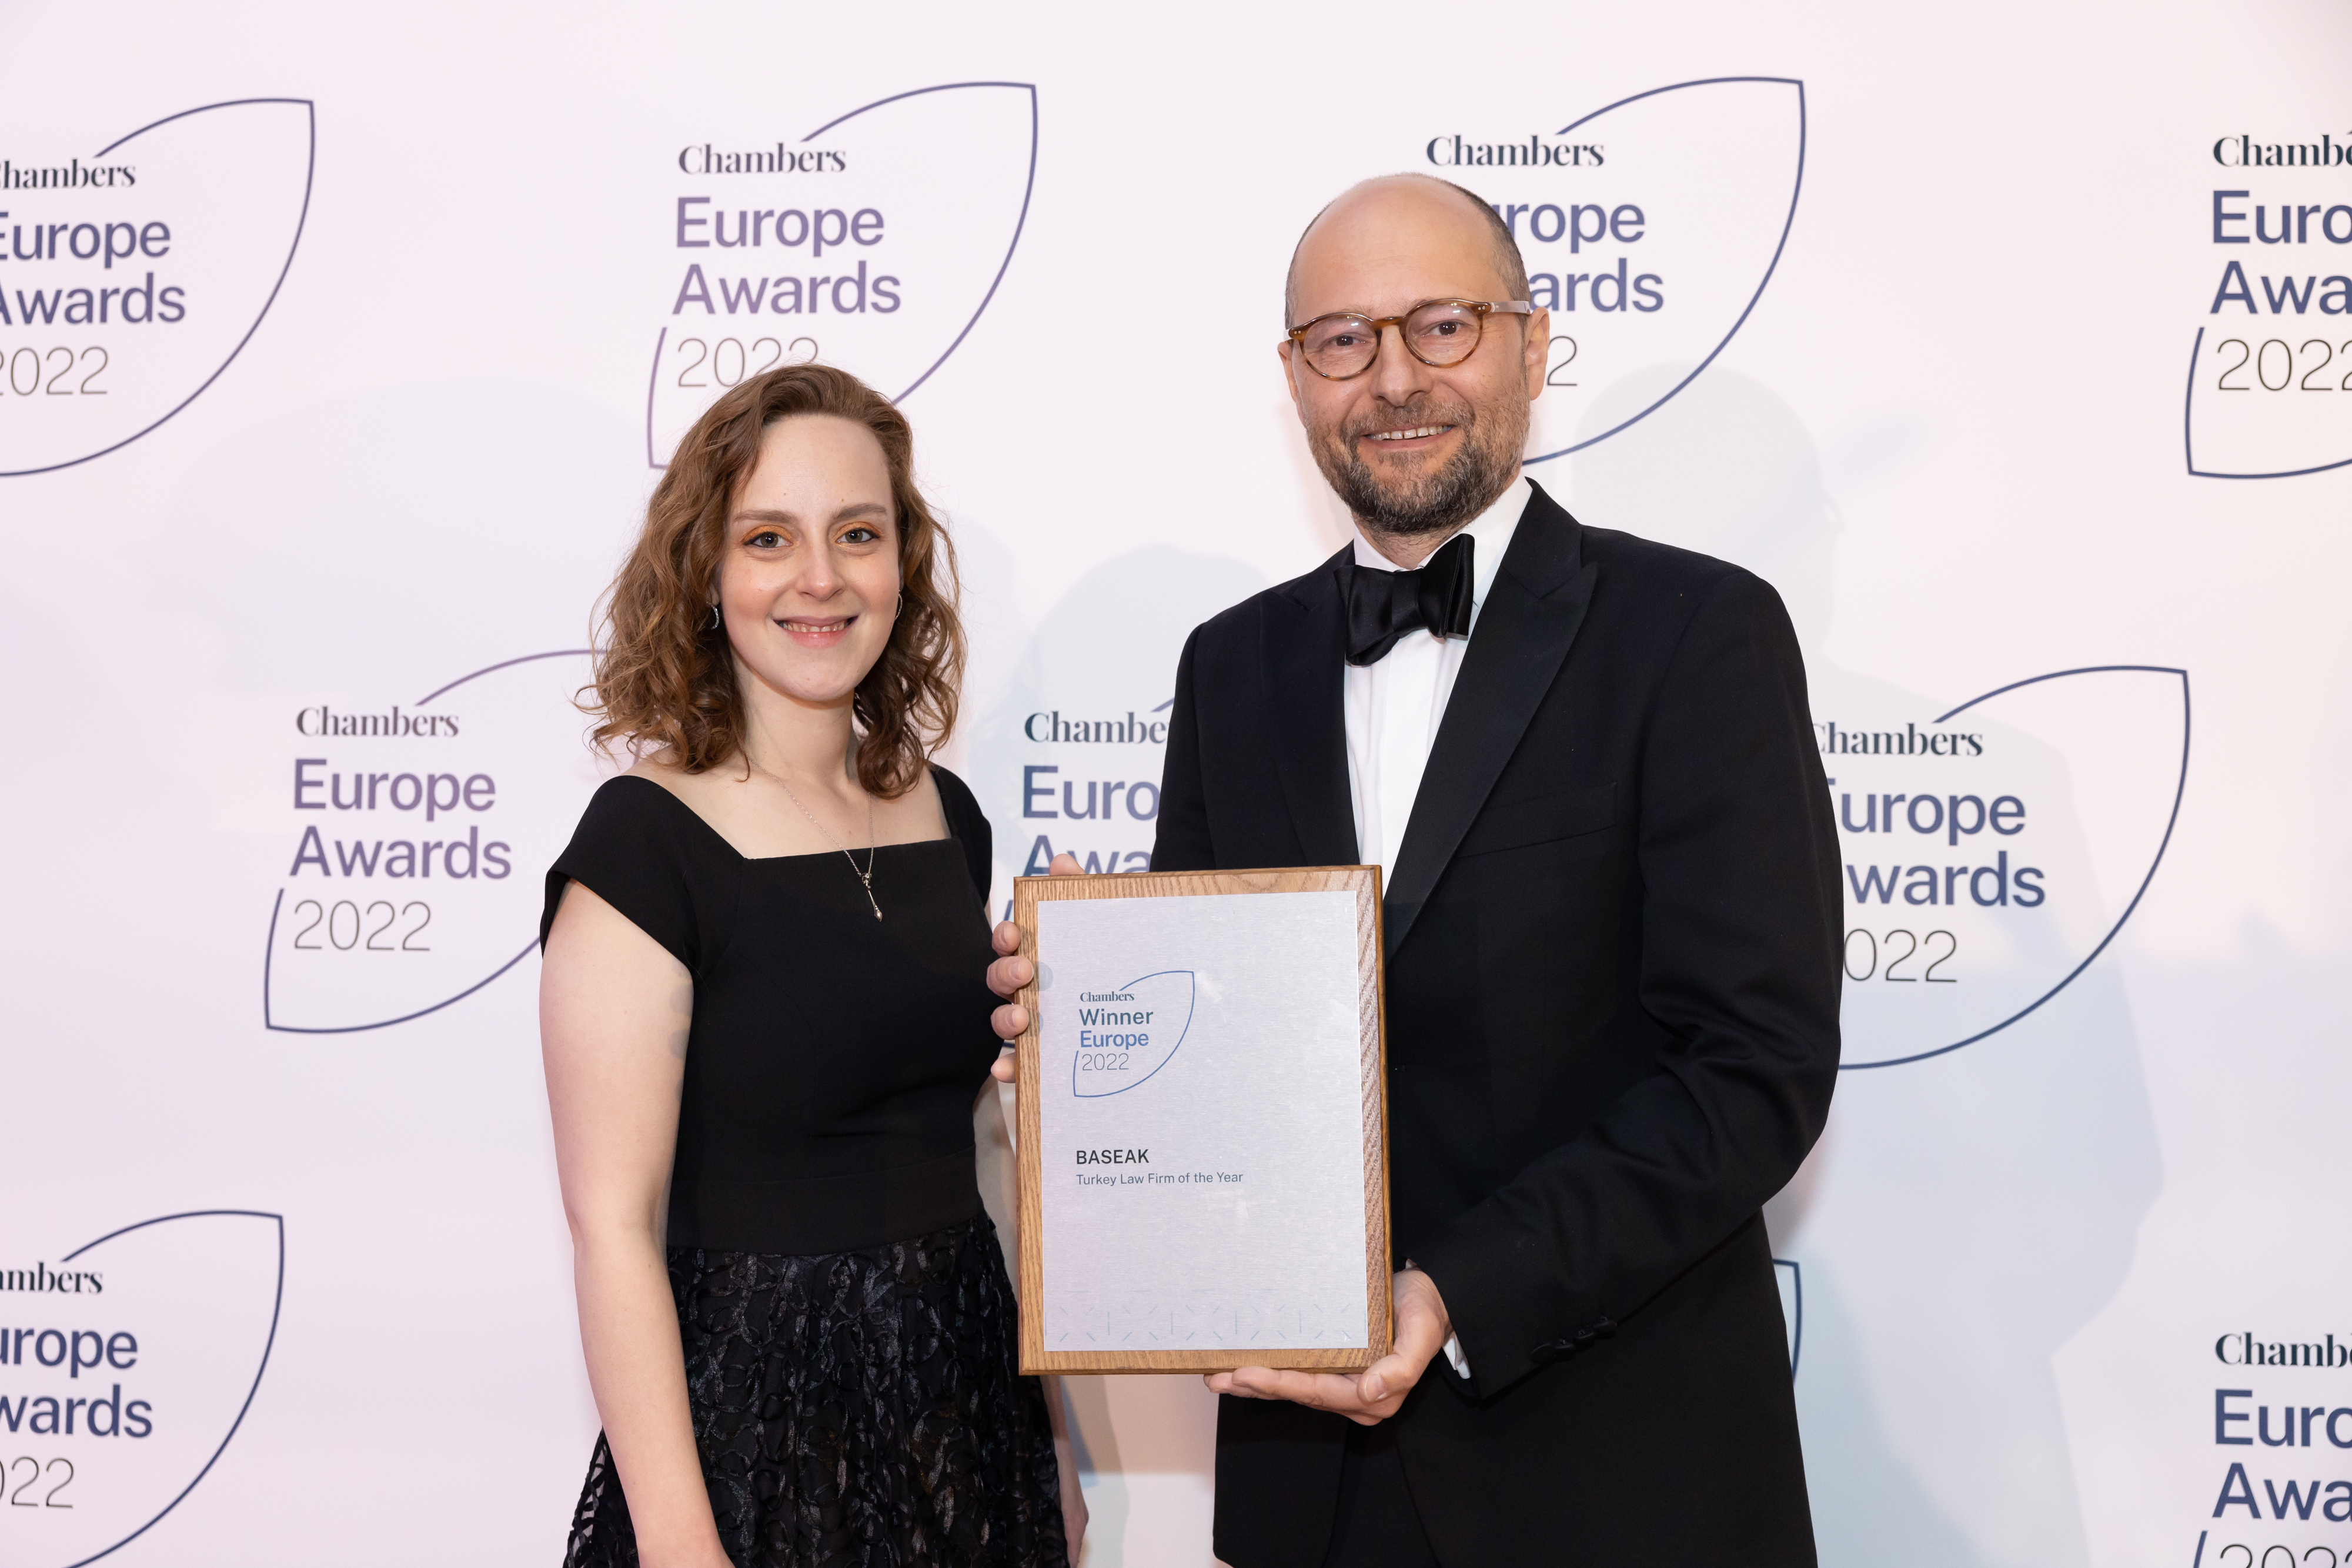 BASEAK wins Law Firm of the Year award at Chambers Europe Awards